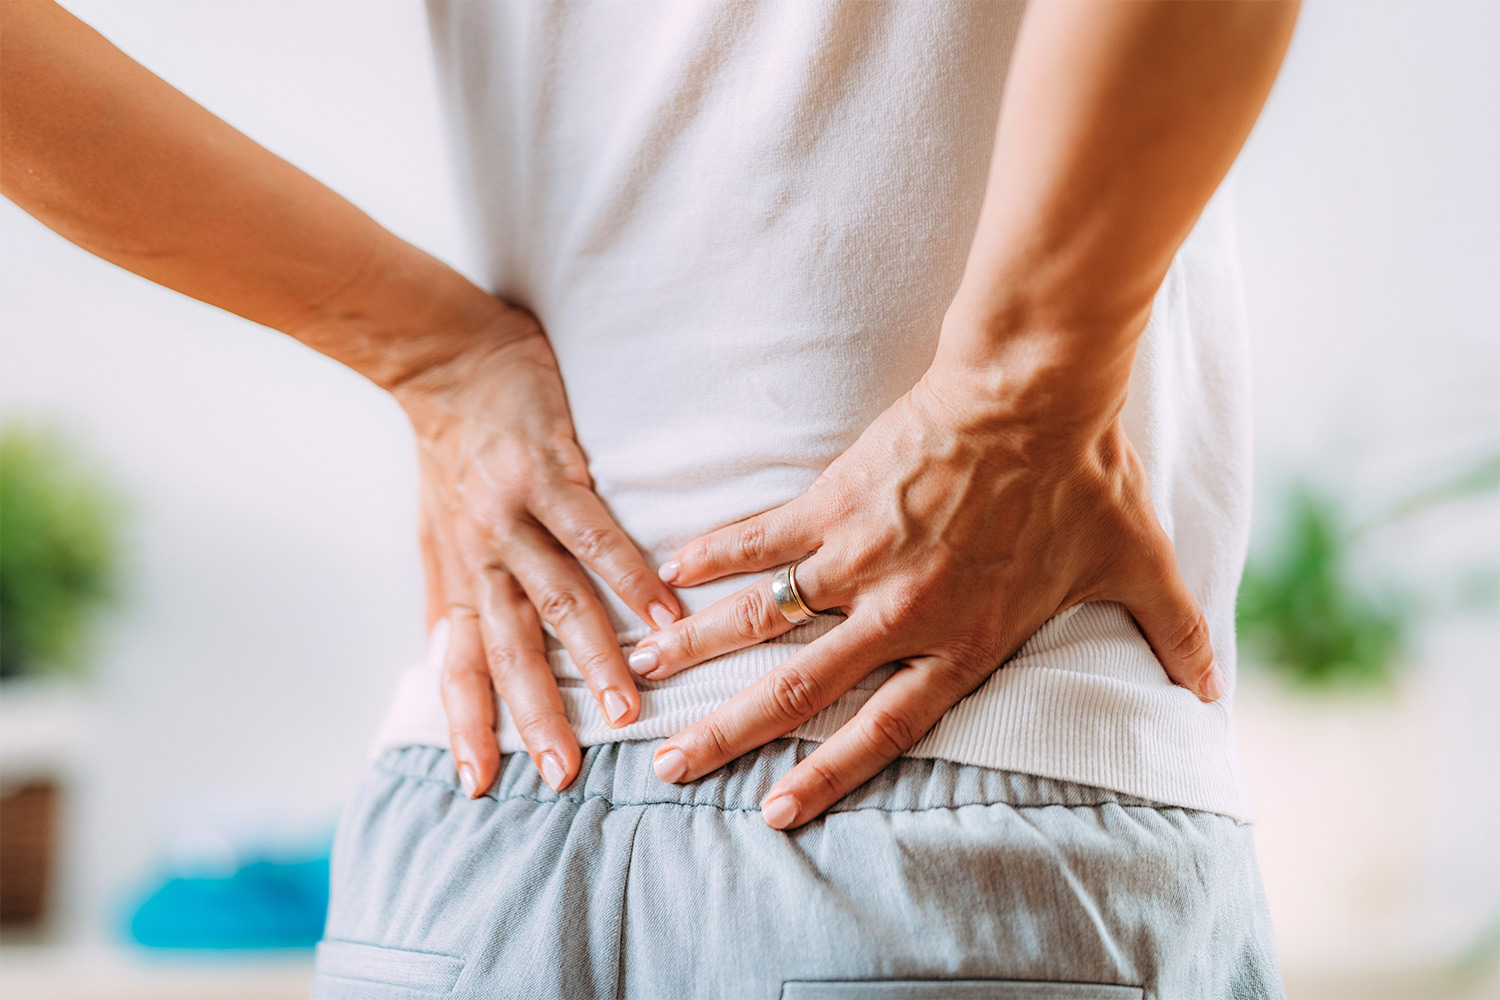 Sciatica VA Rating: Benefits and How To File